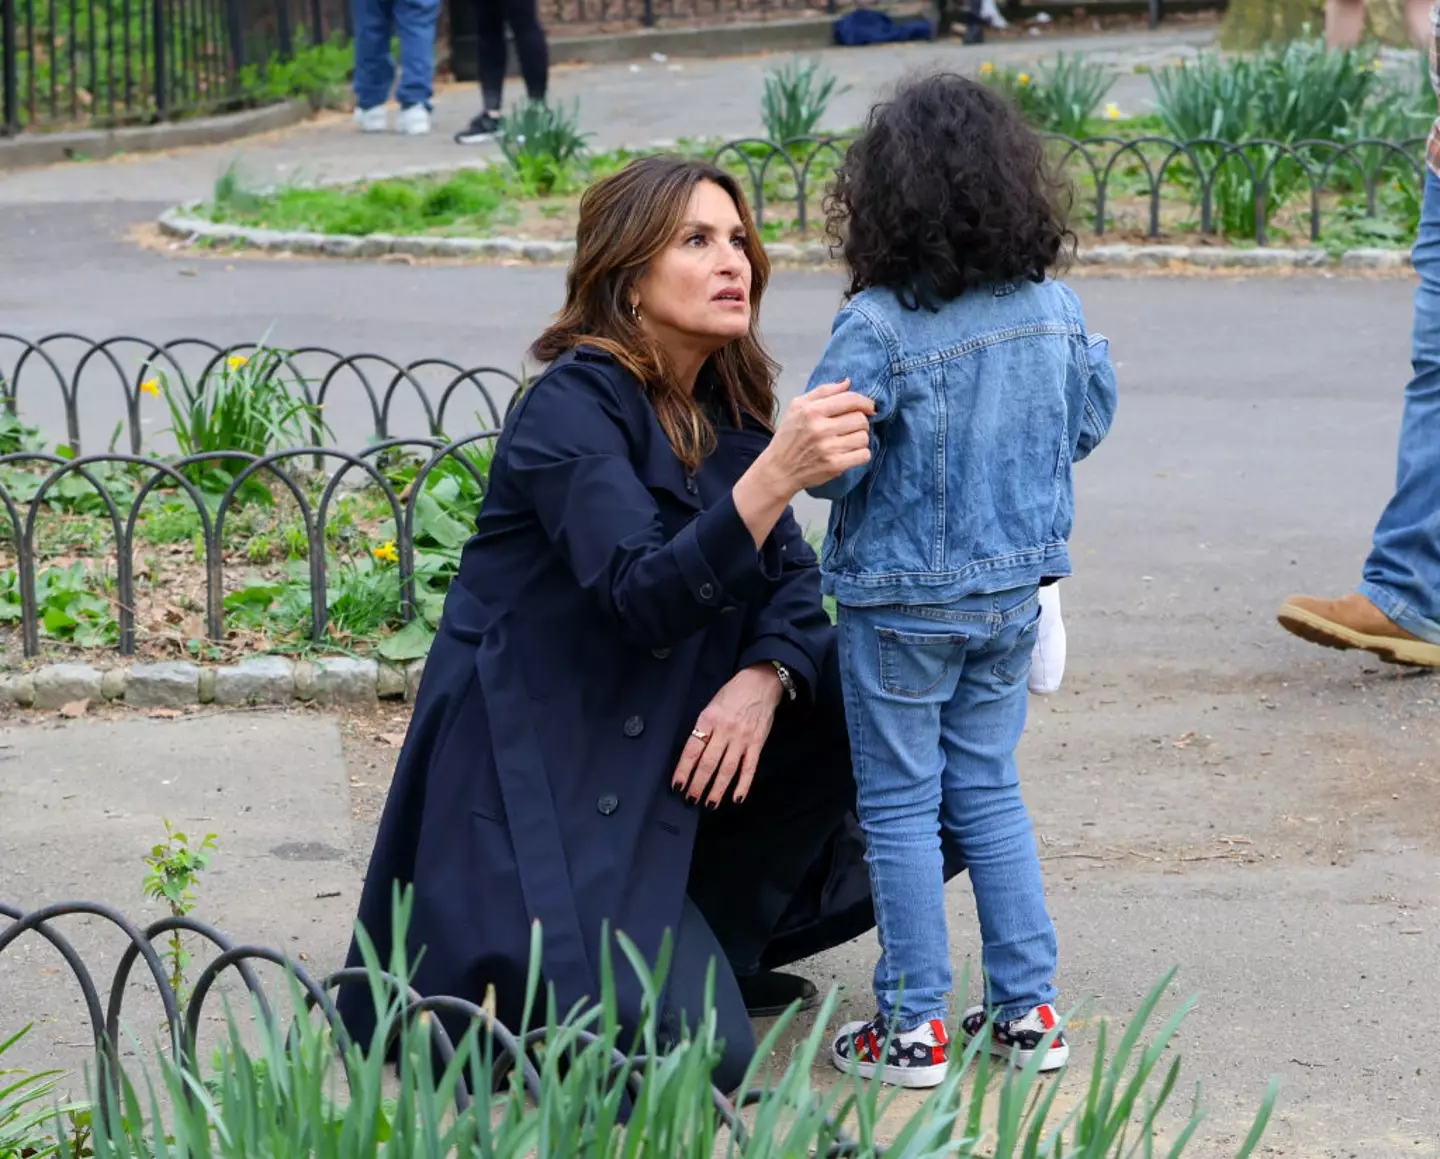 The actress was approached by a little girl who was lost during filming. (Jose Perez/Bauer-Griffin/GC Images)